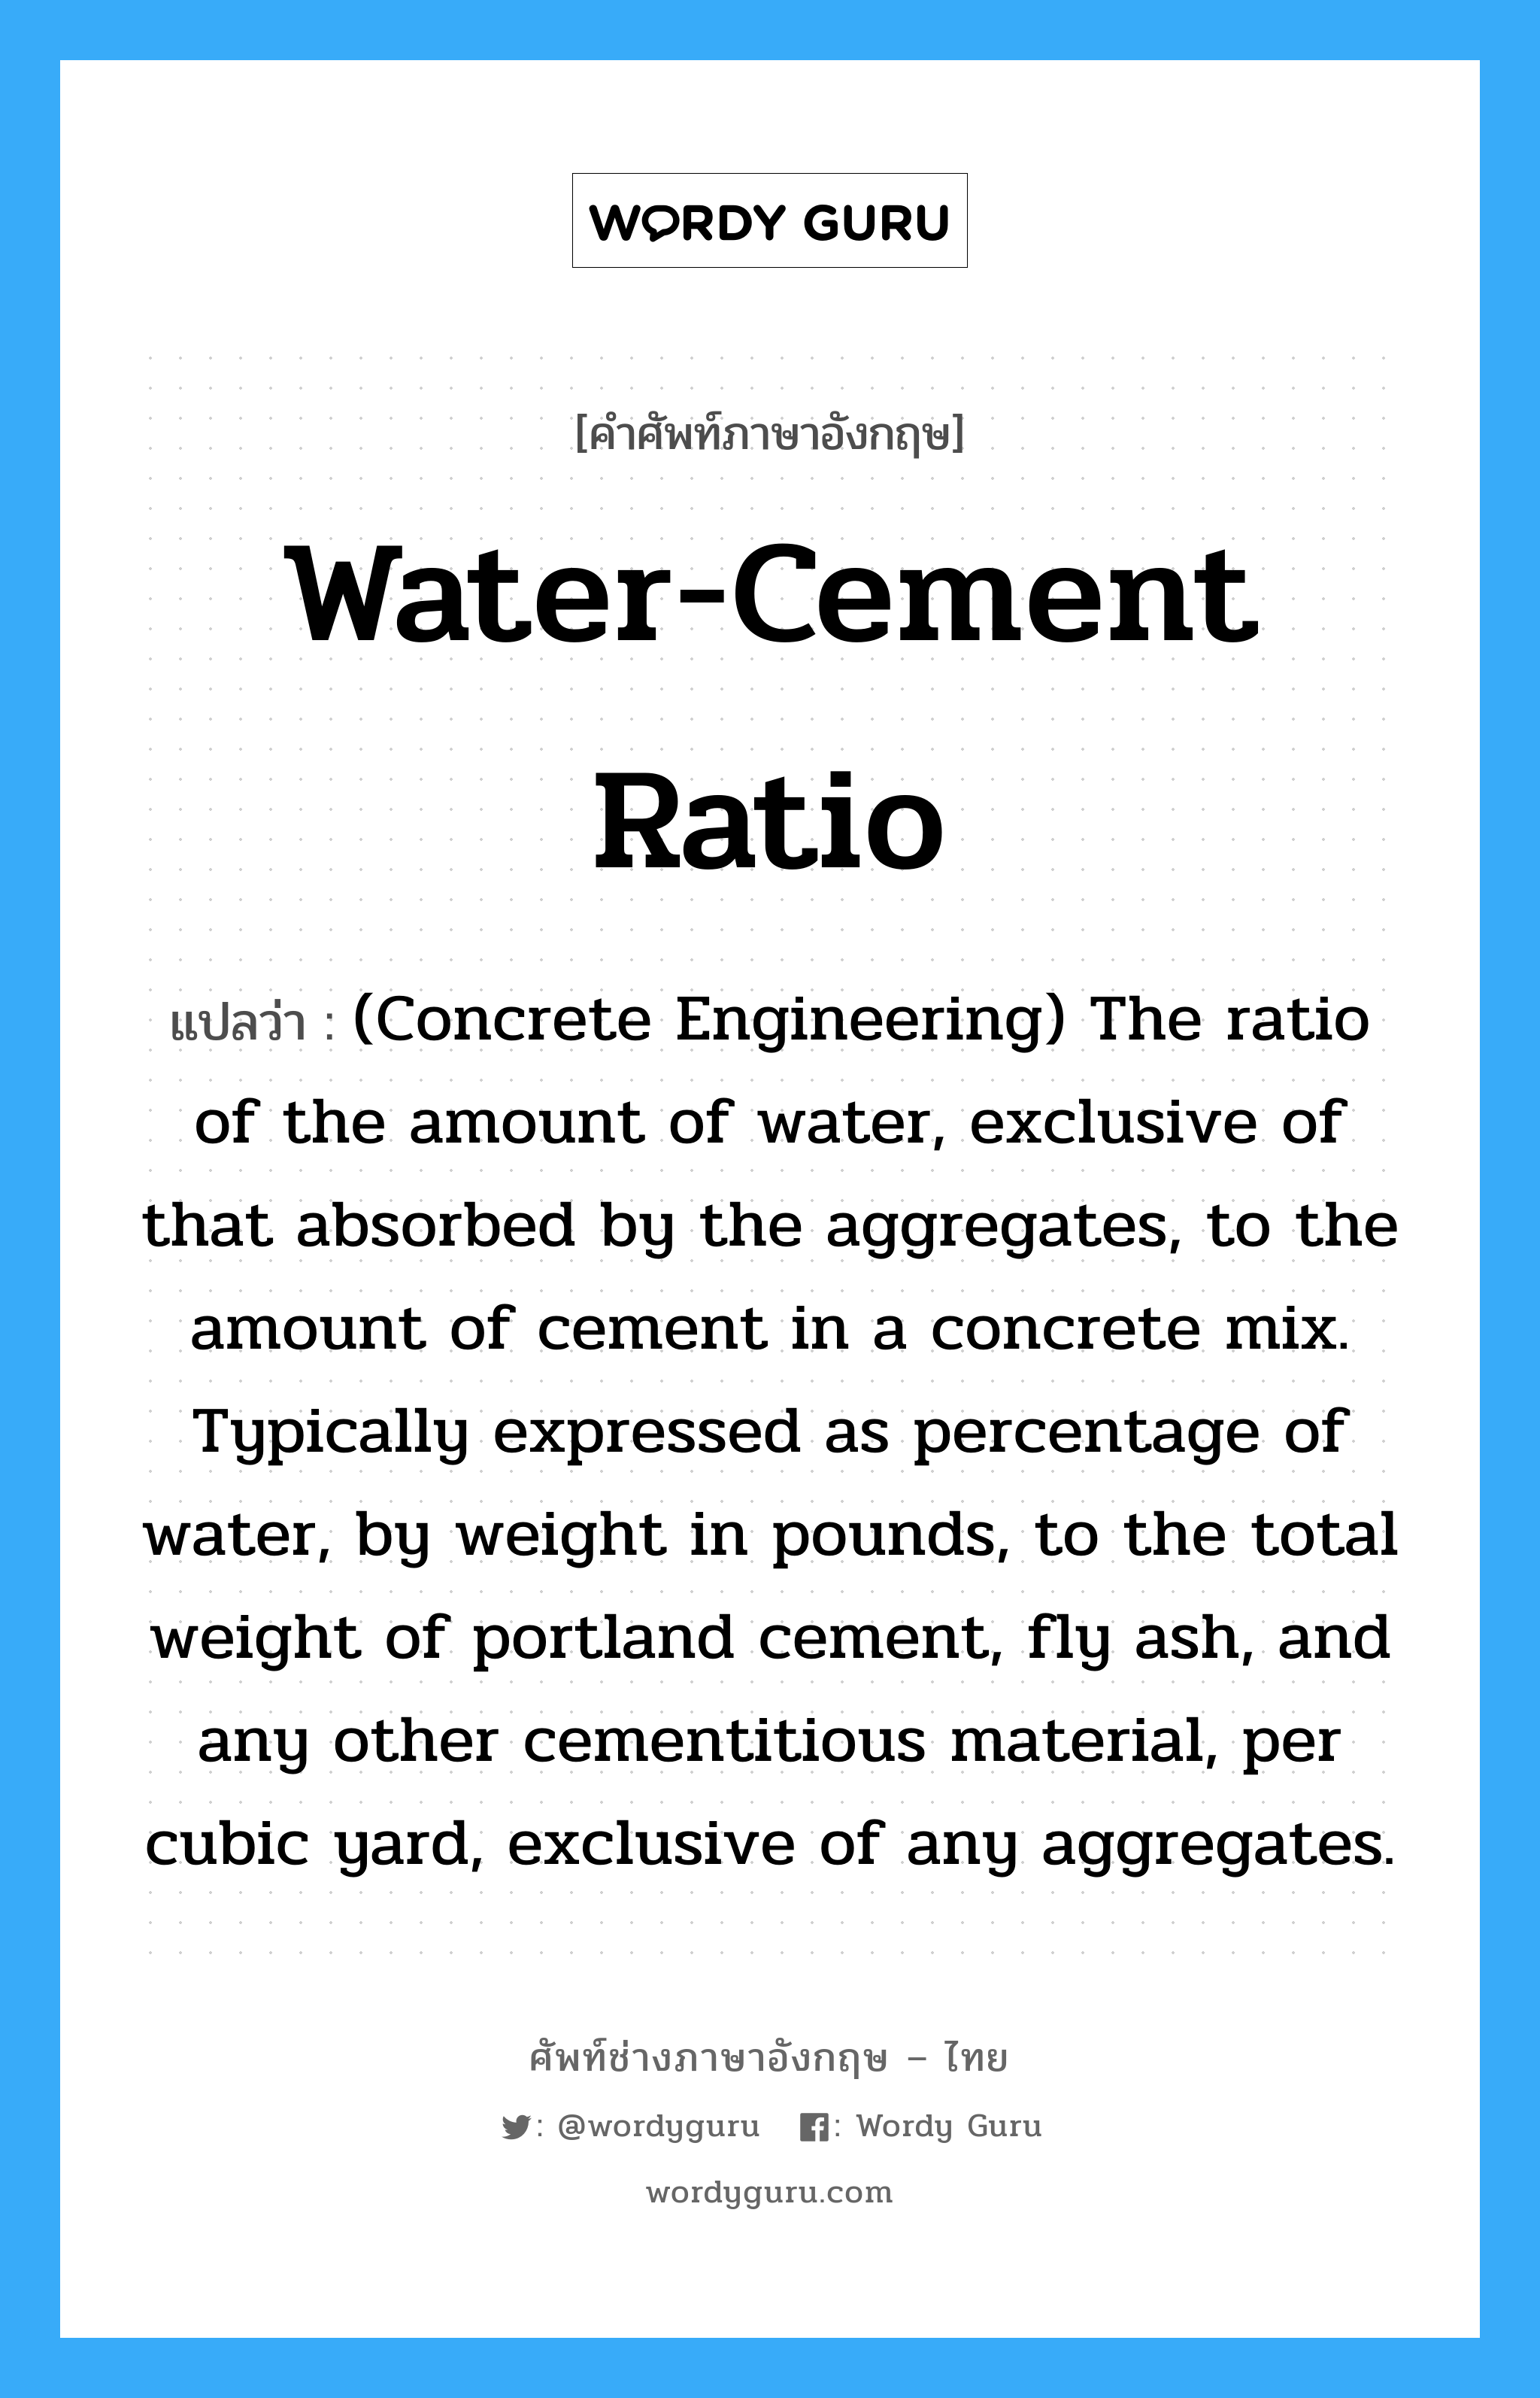 (Concrete Engineering) The ratio of the amount of water, exclusive of that absorbed by the aggregates, to the amount of cement in a concrete mix. Typically expressed as percentage of water, by weight in pounds, to the total weight of portland cement, fly ash, and any other cementitious material, per cubic yard, exclusive of any aggregates. ภาษาอังกฤษ?, คำศัพท์ช่างภาษาอังกฤษ - ไทย (Concrete Engineering) The ratio of the amount of water, exclusive of that absorbed by the aggregates, to the amount of cement in a concrete mix. Typically expressed as percentage of water, by weight in pounds, to the total weight of portland cement, fly ash, and any other cementitious material, per cubic yard, exclusive of any aggregates. คำศัพท์ภาษาอังกฤษ (Concrete Engineering) The ratio of the amount of water, exclusive of that absorbed by the aggregates, to the amount of cement in a concrete mix. Typically expressed as percentage of water, by weight in pounds, to the total weight of portland cement, fly ash, and any other cementitious material, per cubic yard, exclusive of any aggregates. แปลว่า Water-Cement Ratio